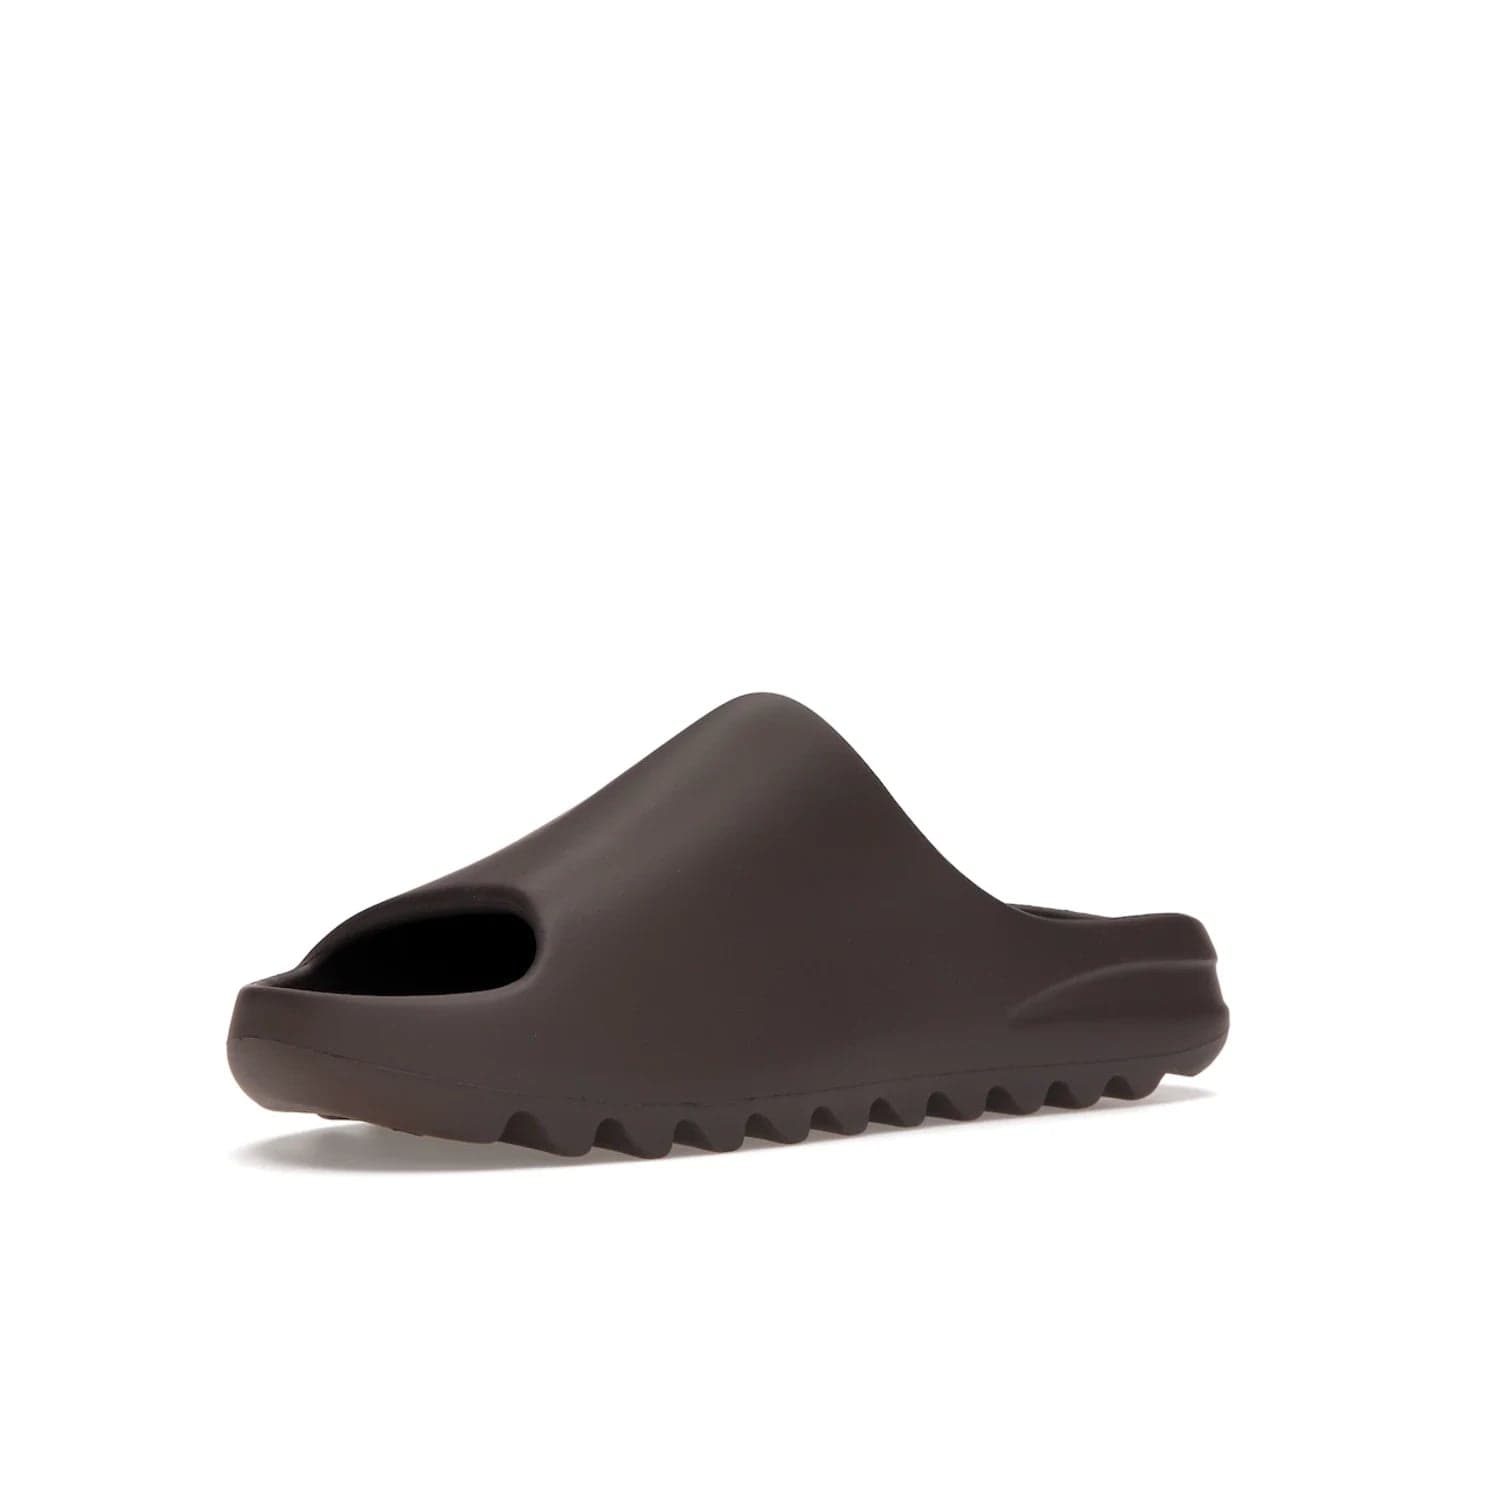 adidas Yeezy Slide Soot - Image 15 - Only at www.BallersClubKickz.com - Shop the Yeezy Slide Soot sneaker by Adidas, a sleek blend of form and function. Monochrome silhouette in Soot/Soot/Soot. Lightweight EVA foam offers comfort and durability. Get the must-have style today.